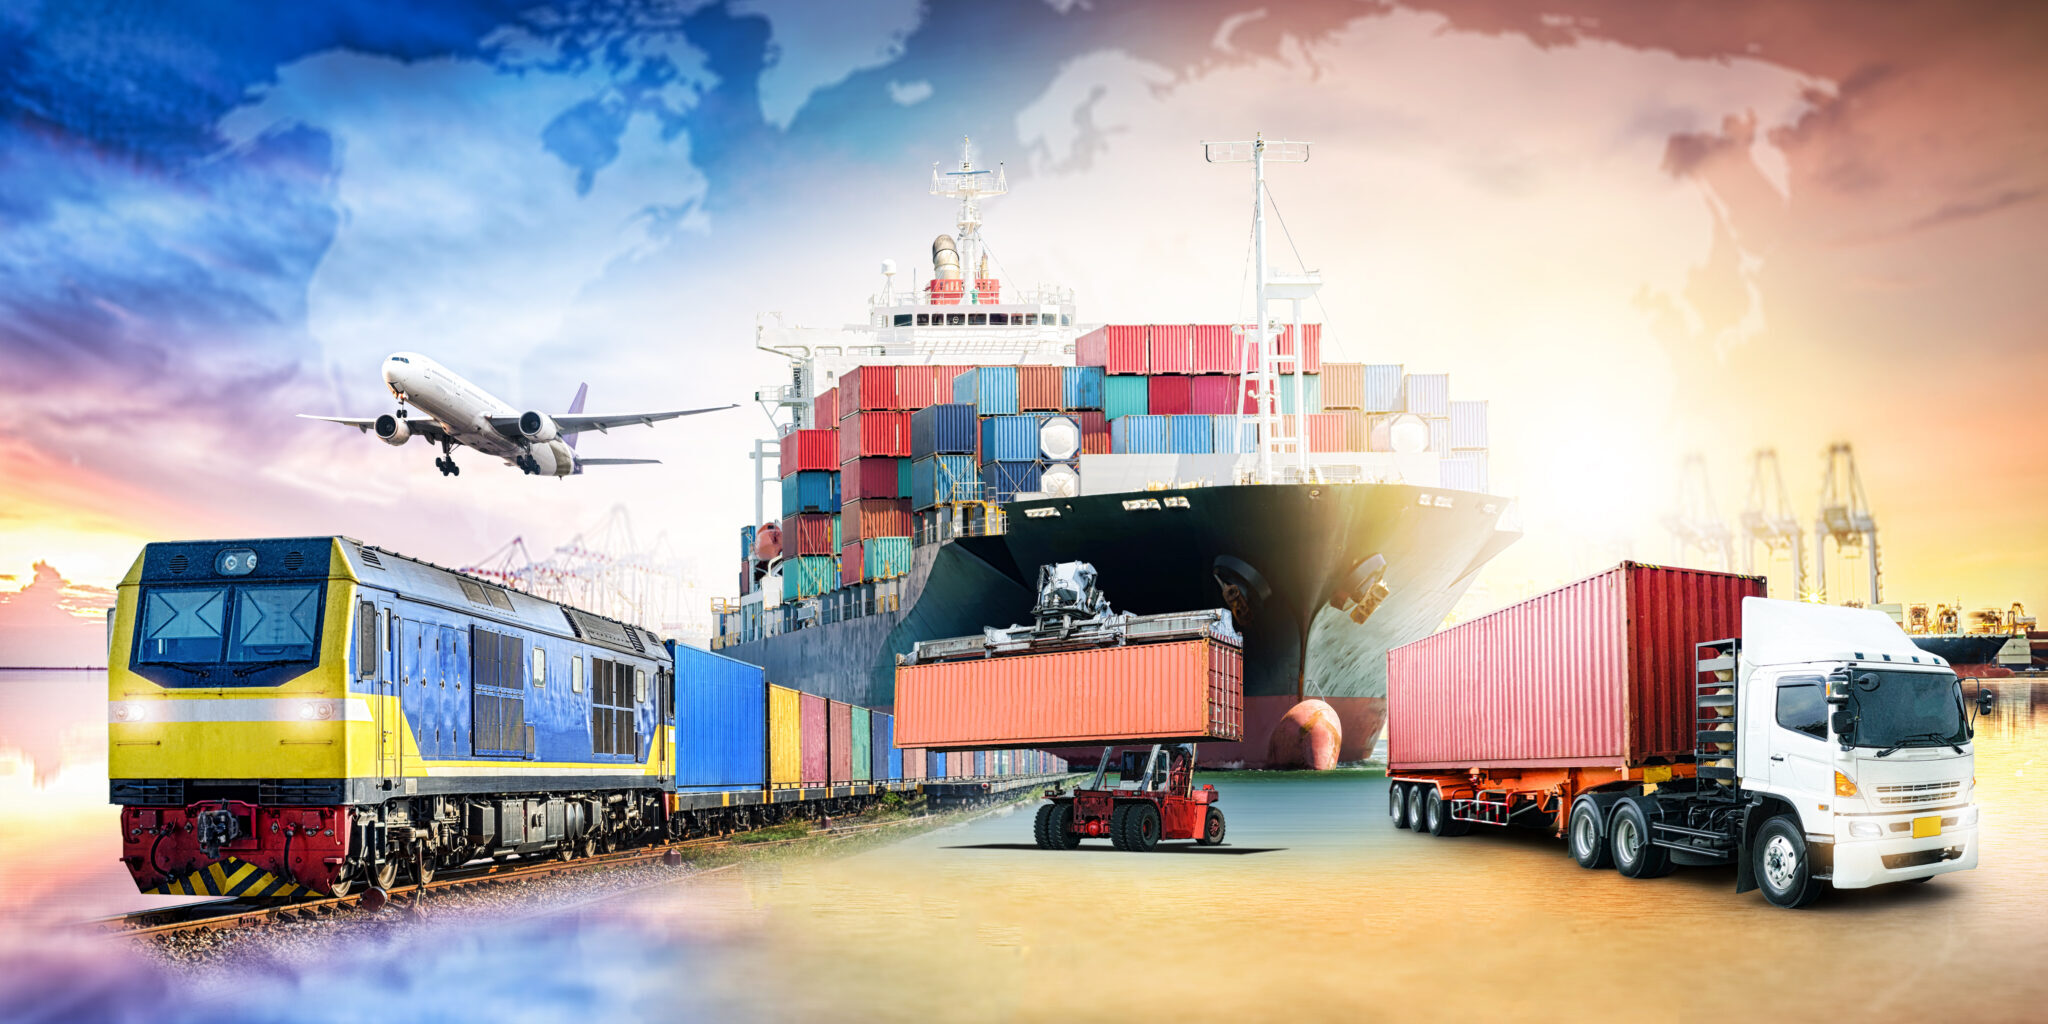 Save Big on Shipping Costs with Our Affordable Freight Services